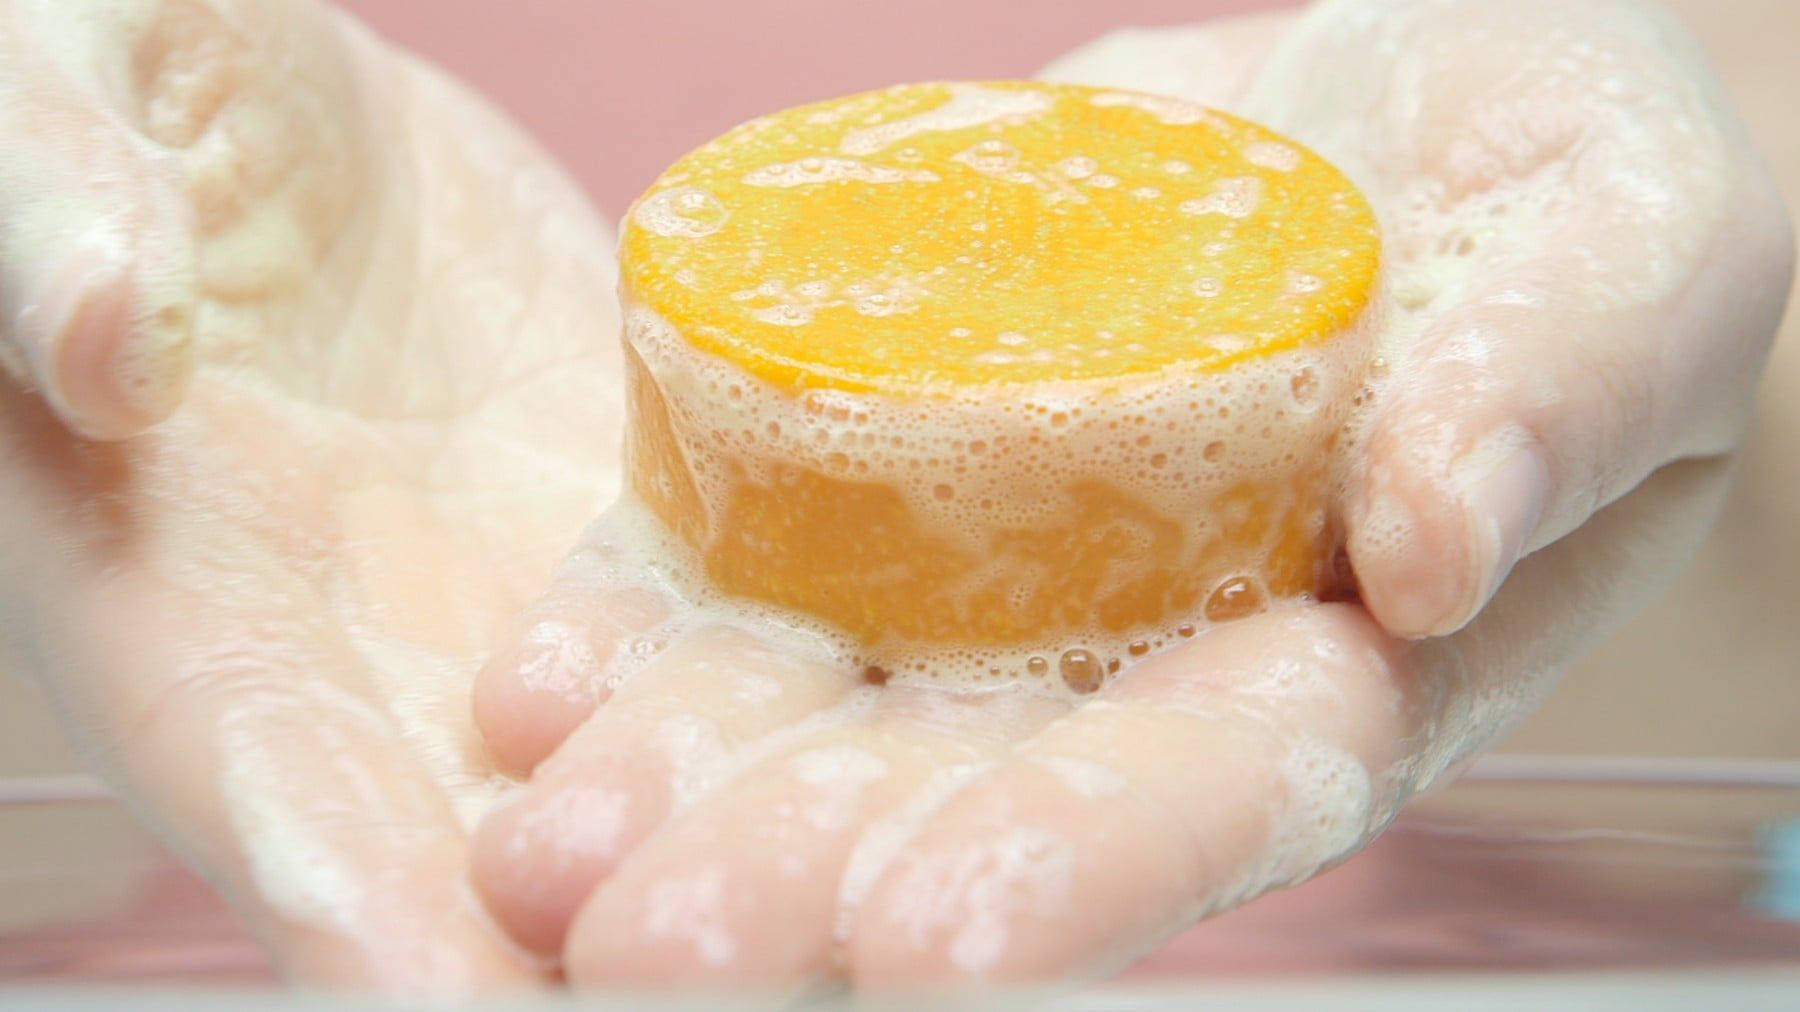 Shower Time Just Got a Lot More Fun With This DIY Shampoo Bar - Shower Time Just Got a Lot More Fun With This DIY Shampoo Bar -   18 diy Beauty for kids ideas